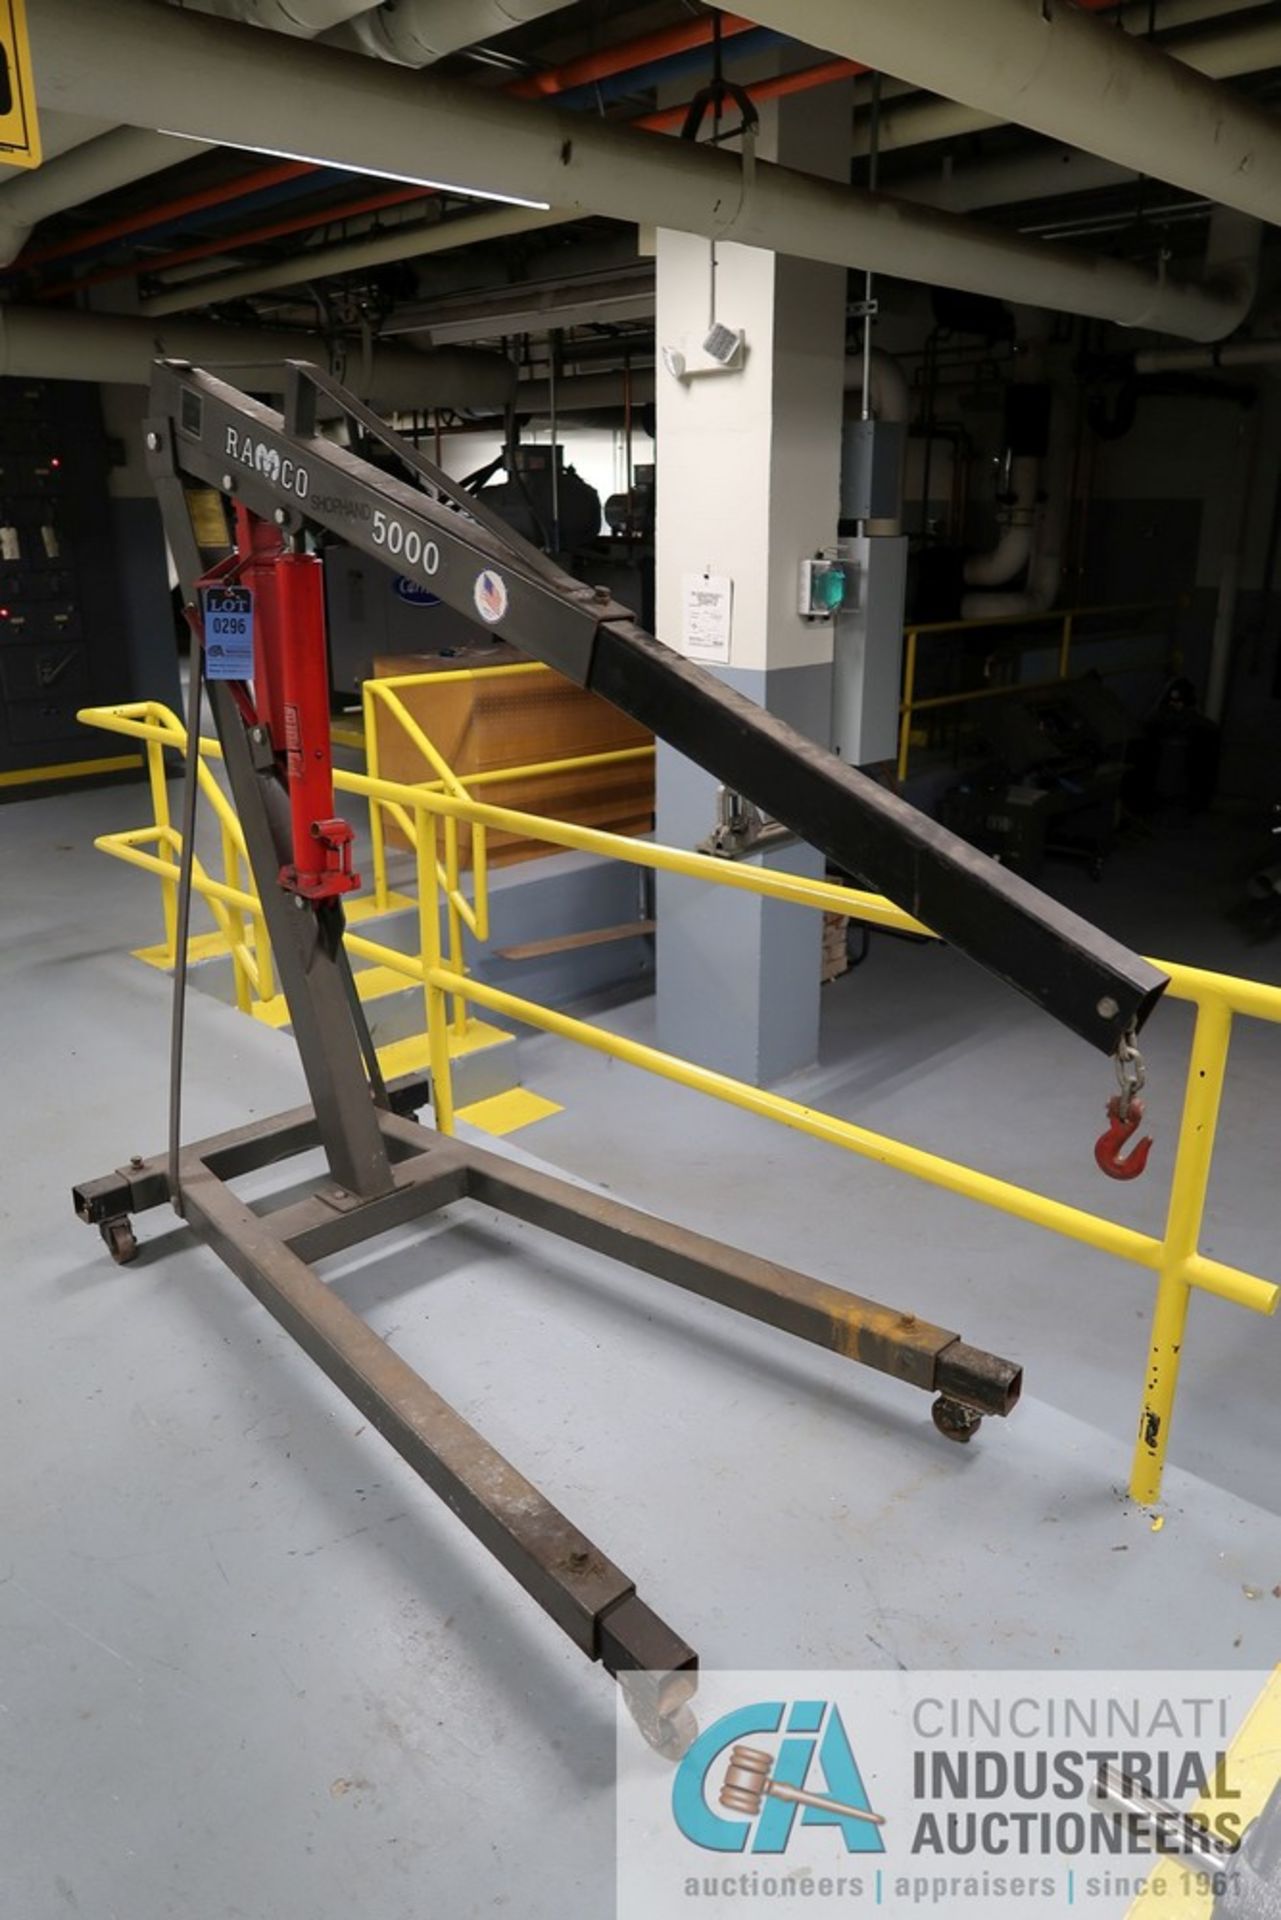 3 TON RAMCO SHOPHAND 5000 ENGINE LIFT **LOCATED IN BASEMENT**